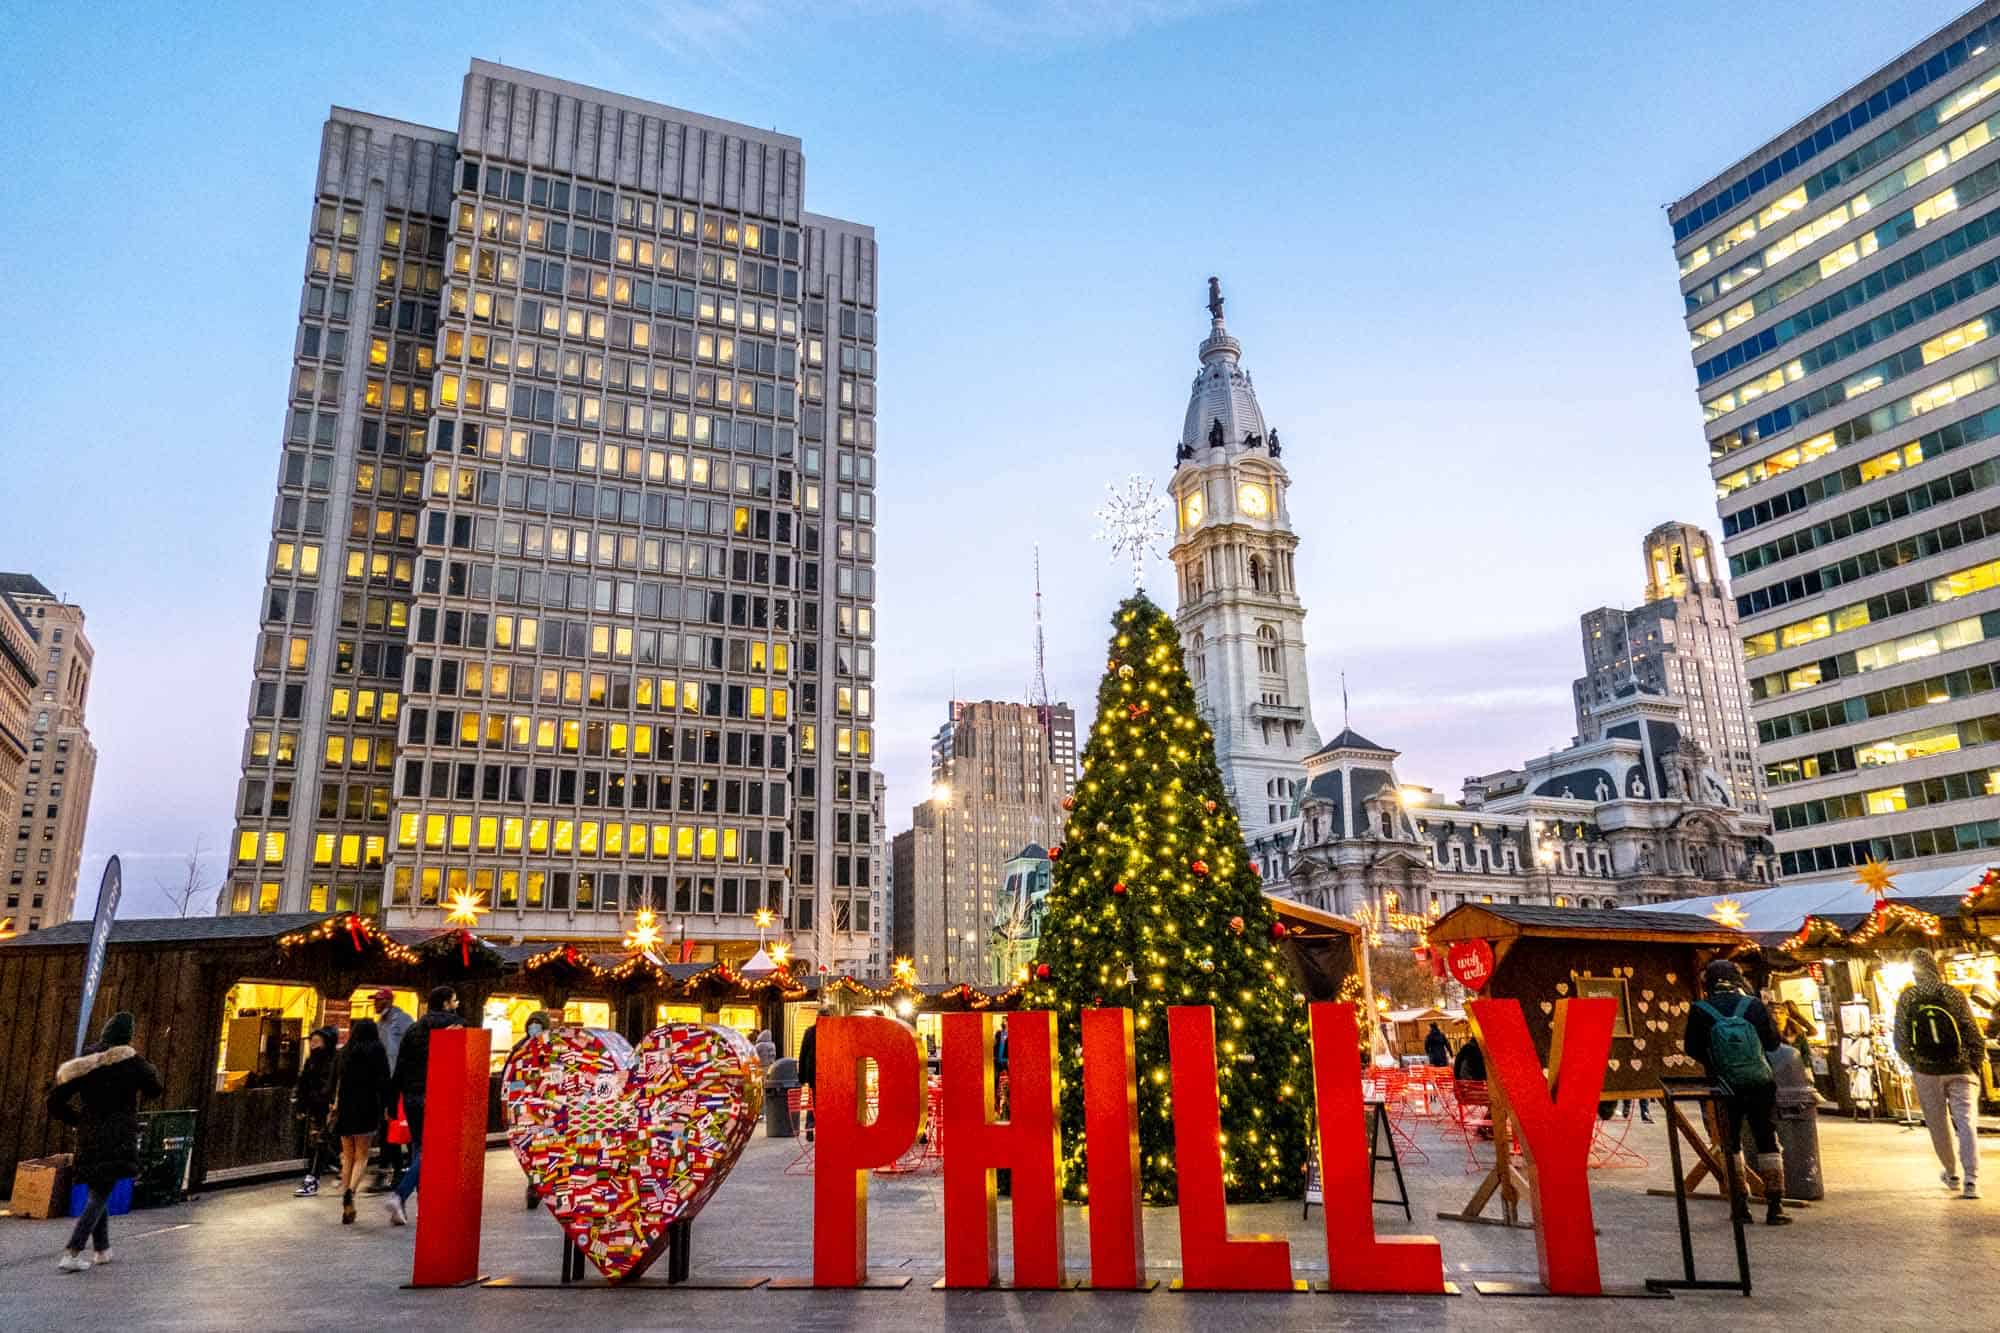 I Heart Philly sign in front of a Christmas tree surrounded by Christmas market stalls.